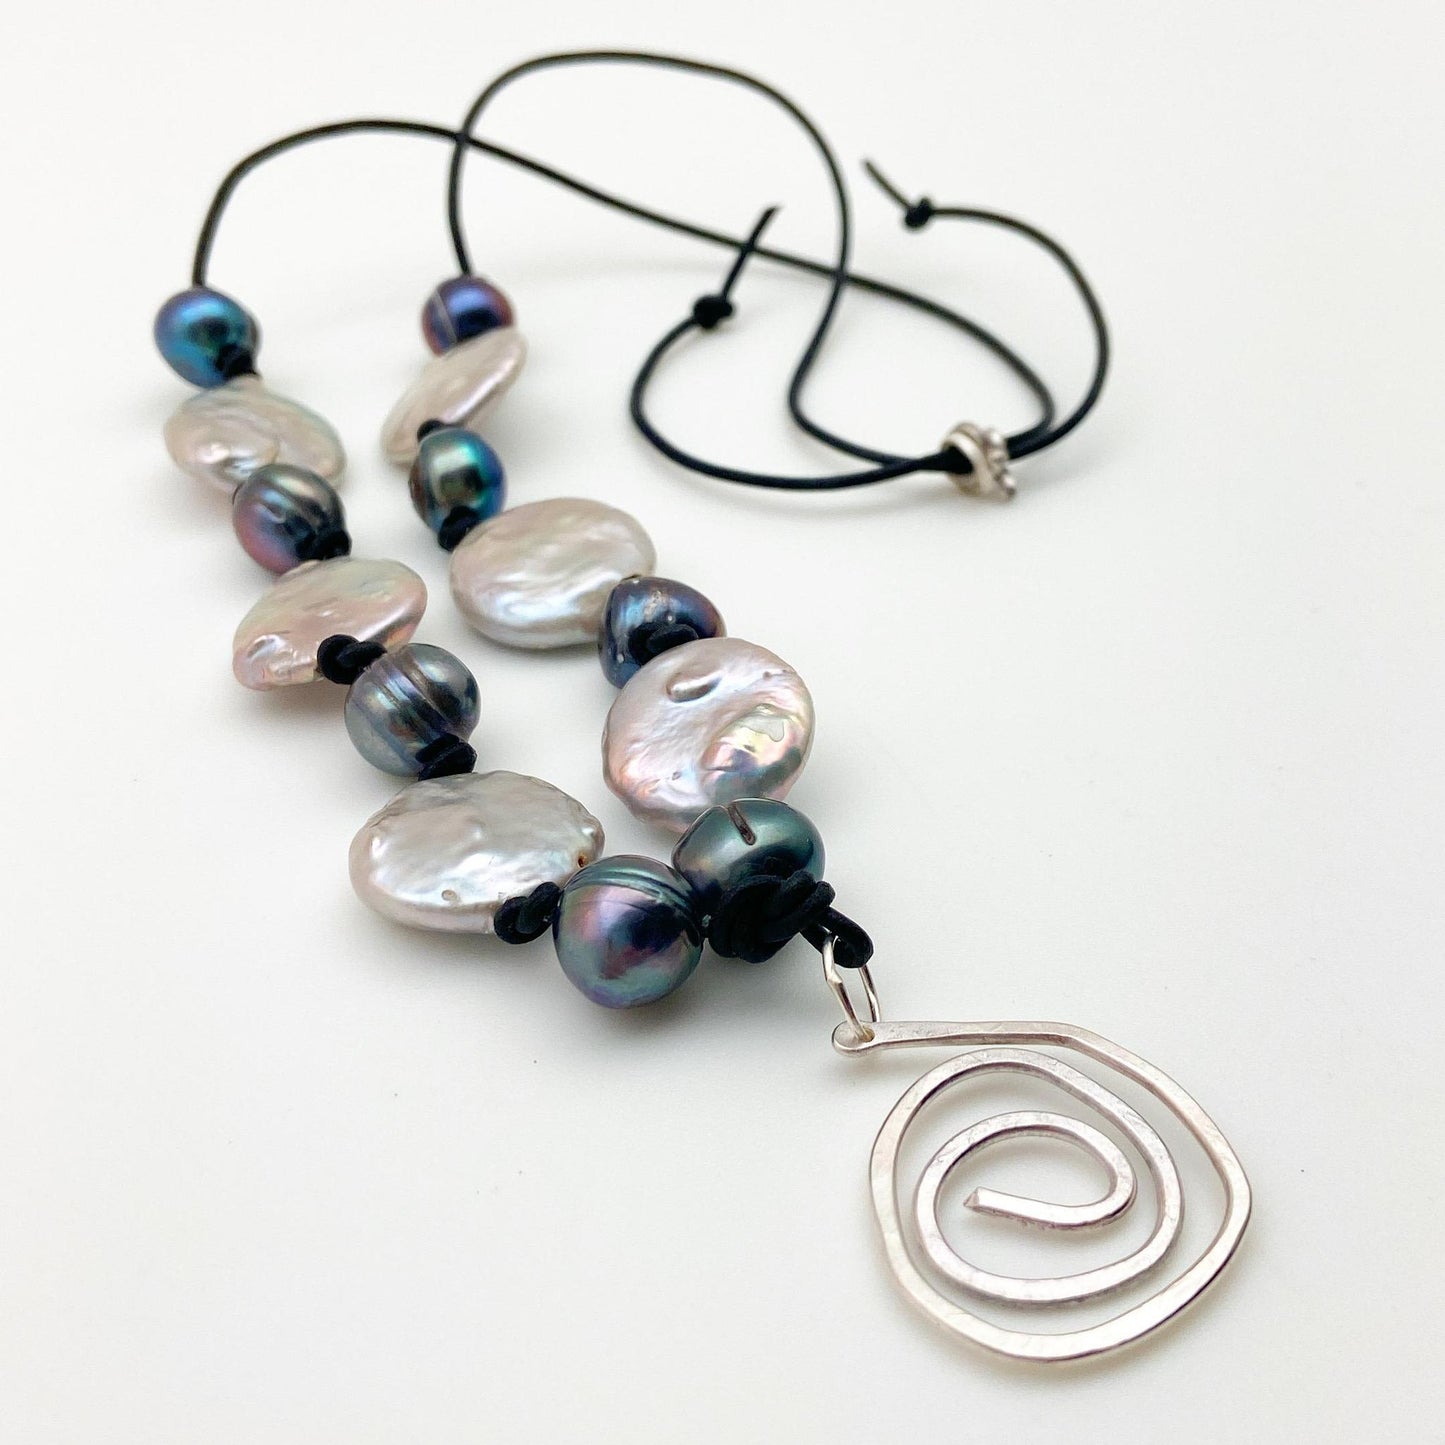 Necklace - Hand-Knotted Pearl on Leather - Sterling Swirl Pendant